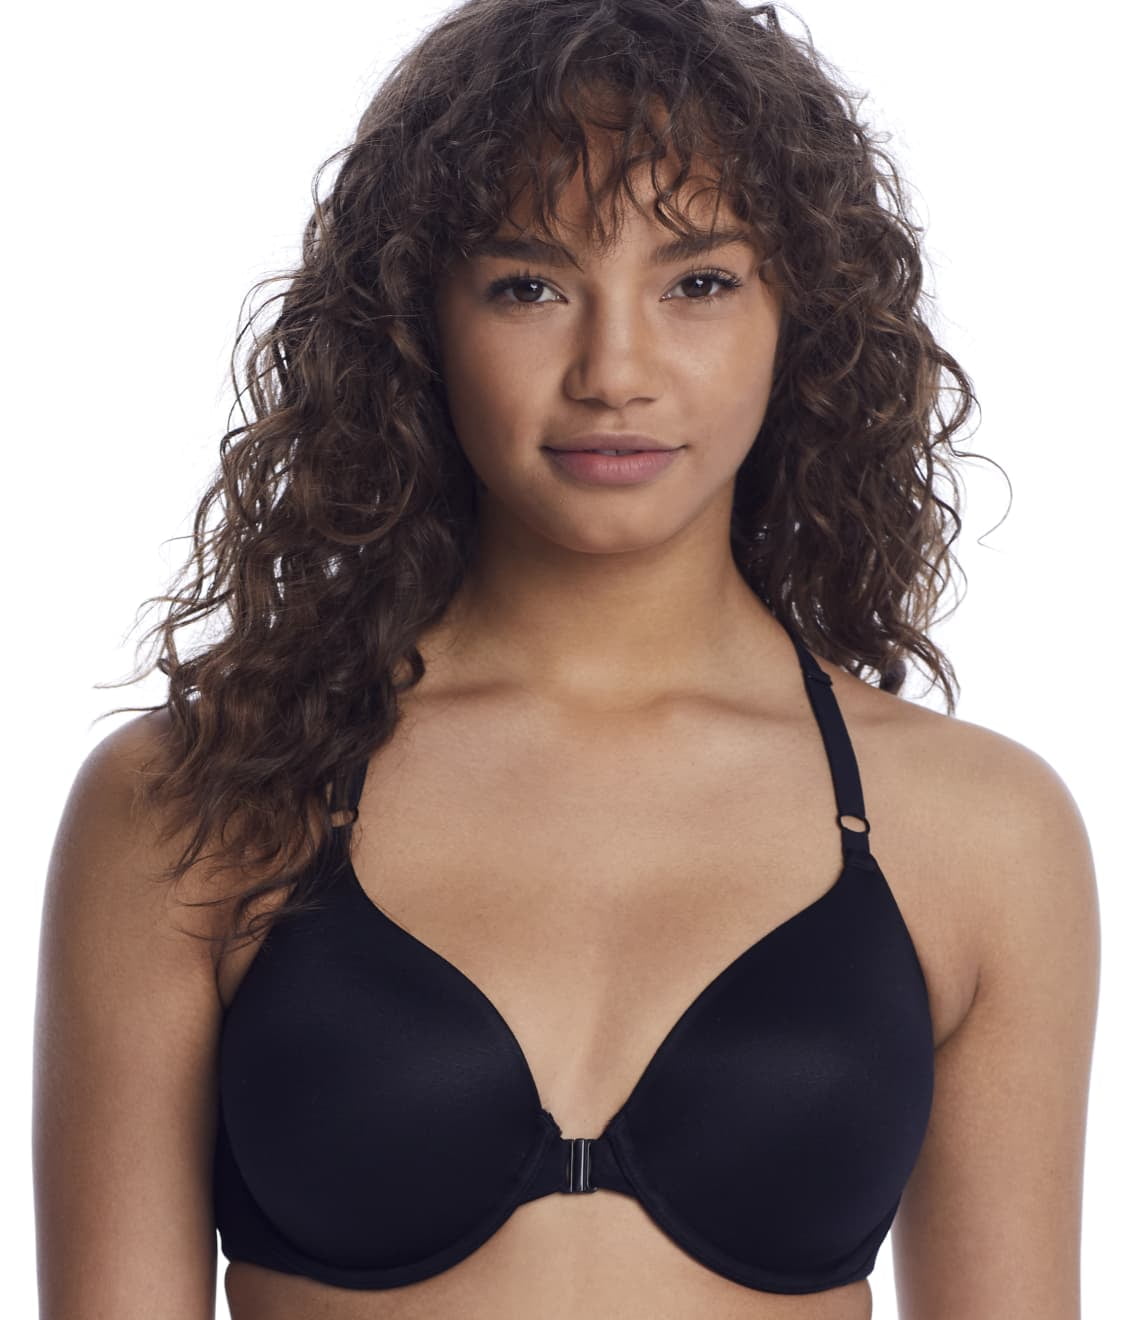 REVEAL Midnight Black The Perfect Support T-Shirt Bra, US 32D